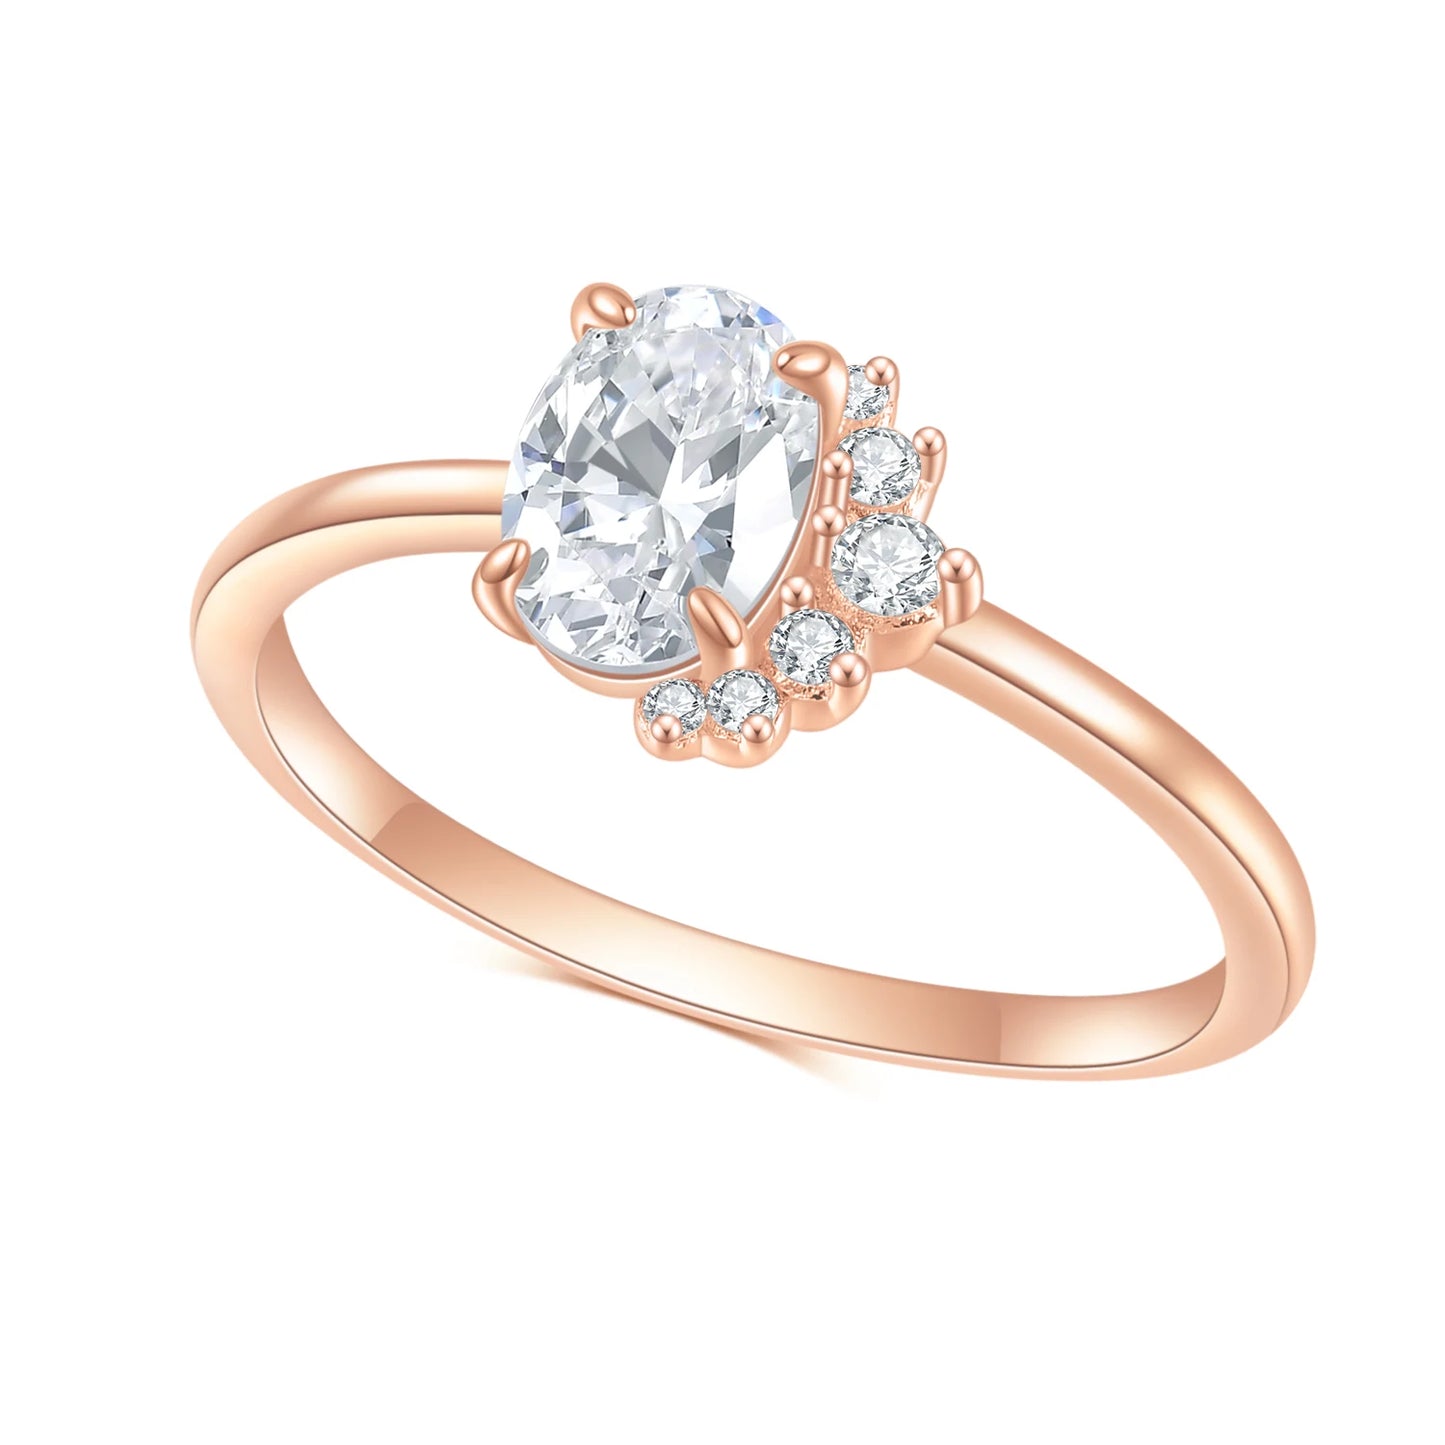 GEM'S BALLET 925 Sterling Silver Moissanite Ring 1.0 TCW Oval Cut Moissanite Half Moon Crescent Cluster Halo Engagement Ring 925 Sterling Silver Rose Gold